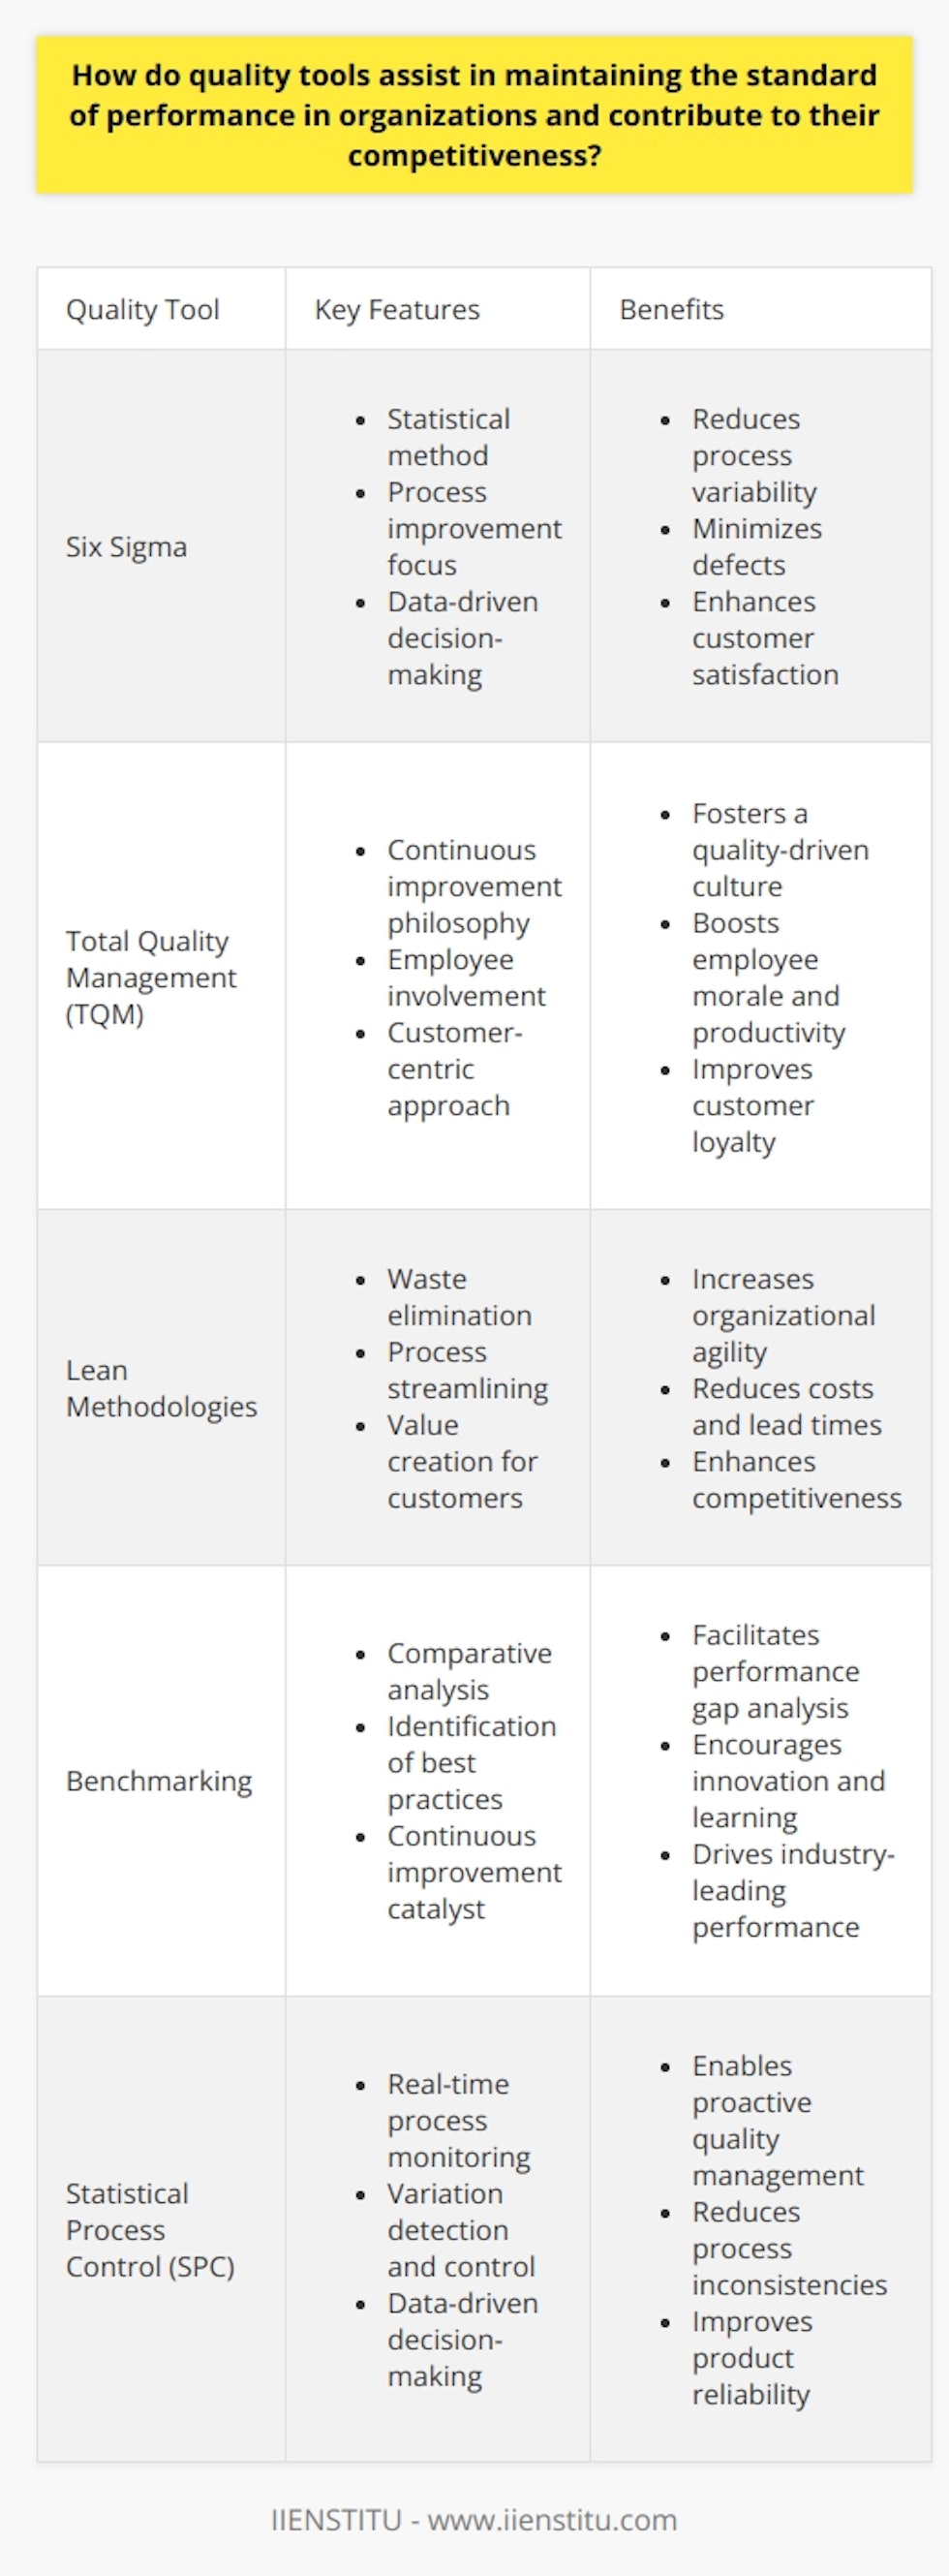 Quality Tools in Organizational Performance Quality tools  prove critical in organizations. They uphold standards. Performance hinges on these tools. They also enhance competitiveness. Widely used tools include  Six Sigma ,  Total Quality Management (TQM) , and  Lean methodologies . These tools use statistical methods. They focus on process improvement. Data is key . Quality tools rely on data analysis. Data informs decision-making. It reduces guesswork. Consistency in performance follows. Organizations achieve process standardization. They avoid deviations. They meet industry benchmarks. Standard Maintenance with Quality Tools Quality tools enable ongoing performance monitoring. They identify process inefficiencies. They point out defects. The focus is on early detection. Early remediation becomes possible. Costly errors get avoided. Customer satisfaction improves. Continuous Improvement Organizations commit to  continuous improvement . Its a core principle. Quality tools facilitate this journey. They foster a culture of efficiency. The aim is perpetual enhancement. Teams engage in regular reviews. They refine processes. They adapt to changing environments. Competitive Edge through Quality Competitiveness demands excellence. Quality tools equip organizations for this battle. They offer frameworks for improvement. They build robust processes. They drive innovation. Organizations sustain high-quality outputs. The Role of Employee Involvement Employee involvement is critical. Quality tools promote staff engagement. Teams work on quality initiatives. They solve problems together. They share insights. They grow professionally. Employee morale skyrockets. Teams achieve productivity gains. They minimize waste. They enhance value for customers.  Conclusion Quality tools are indispensable. They uphold performance standards. They enhance organizational competitiveness. Leaner processes result. Organizational agility increases. Customer-focused strategies succeed. Organizations that invest in quality tools thrive. They stand out in competitive markets.